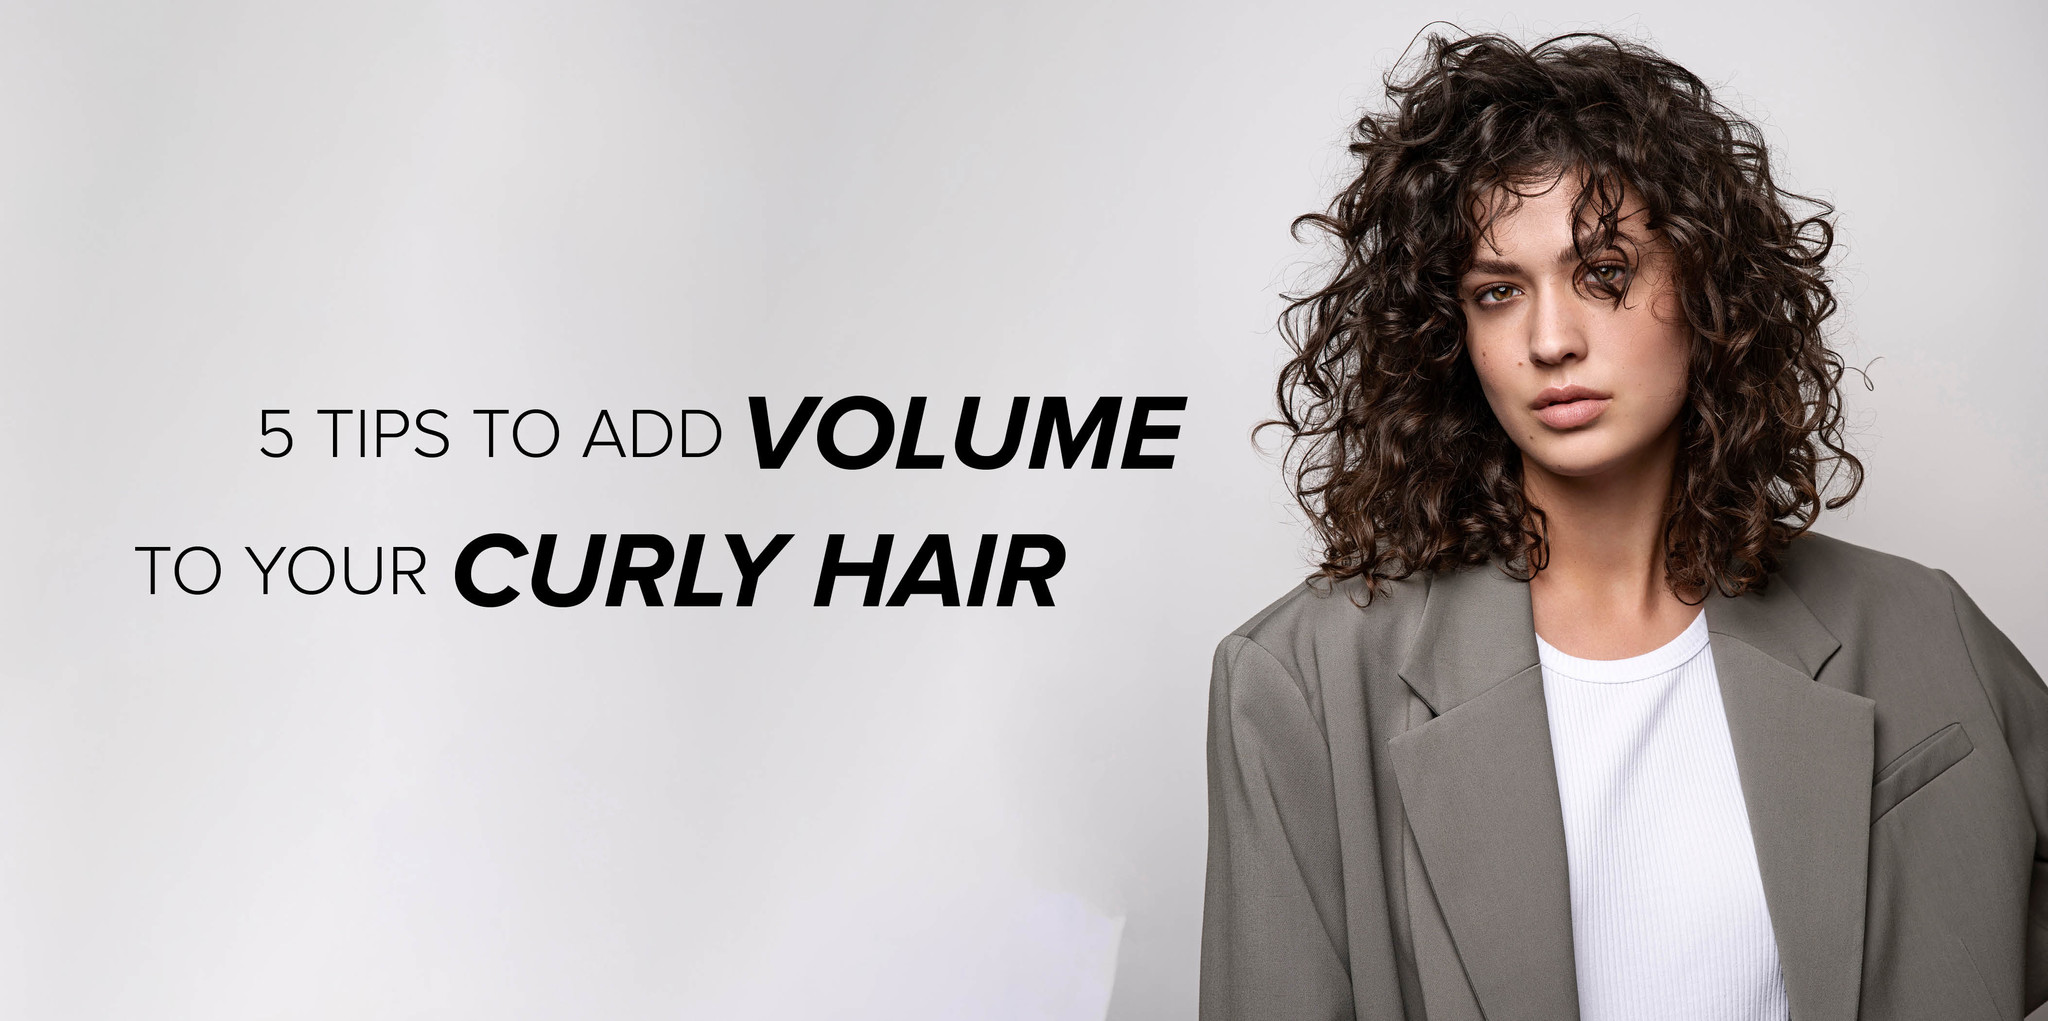 5 tips to add volume to your curly hair - The Insiders